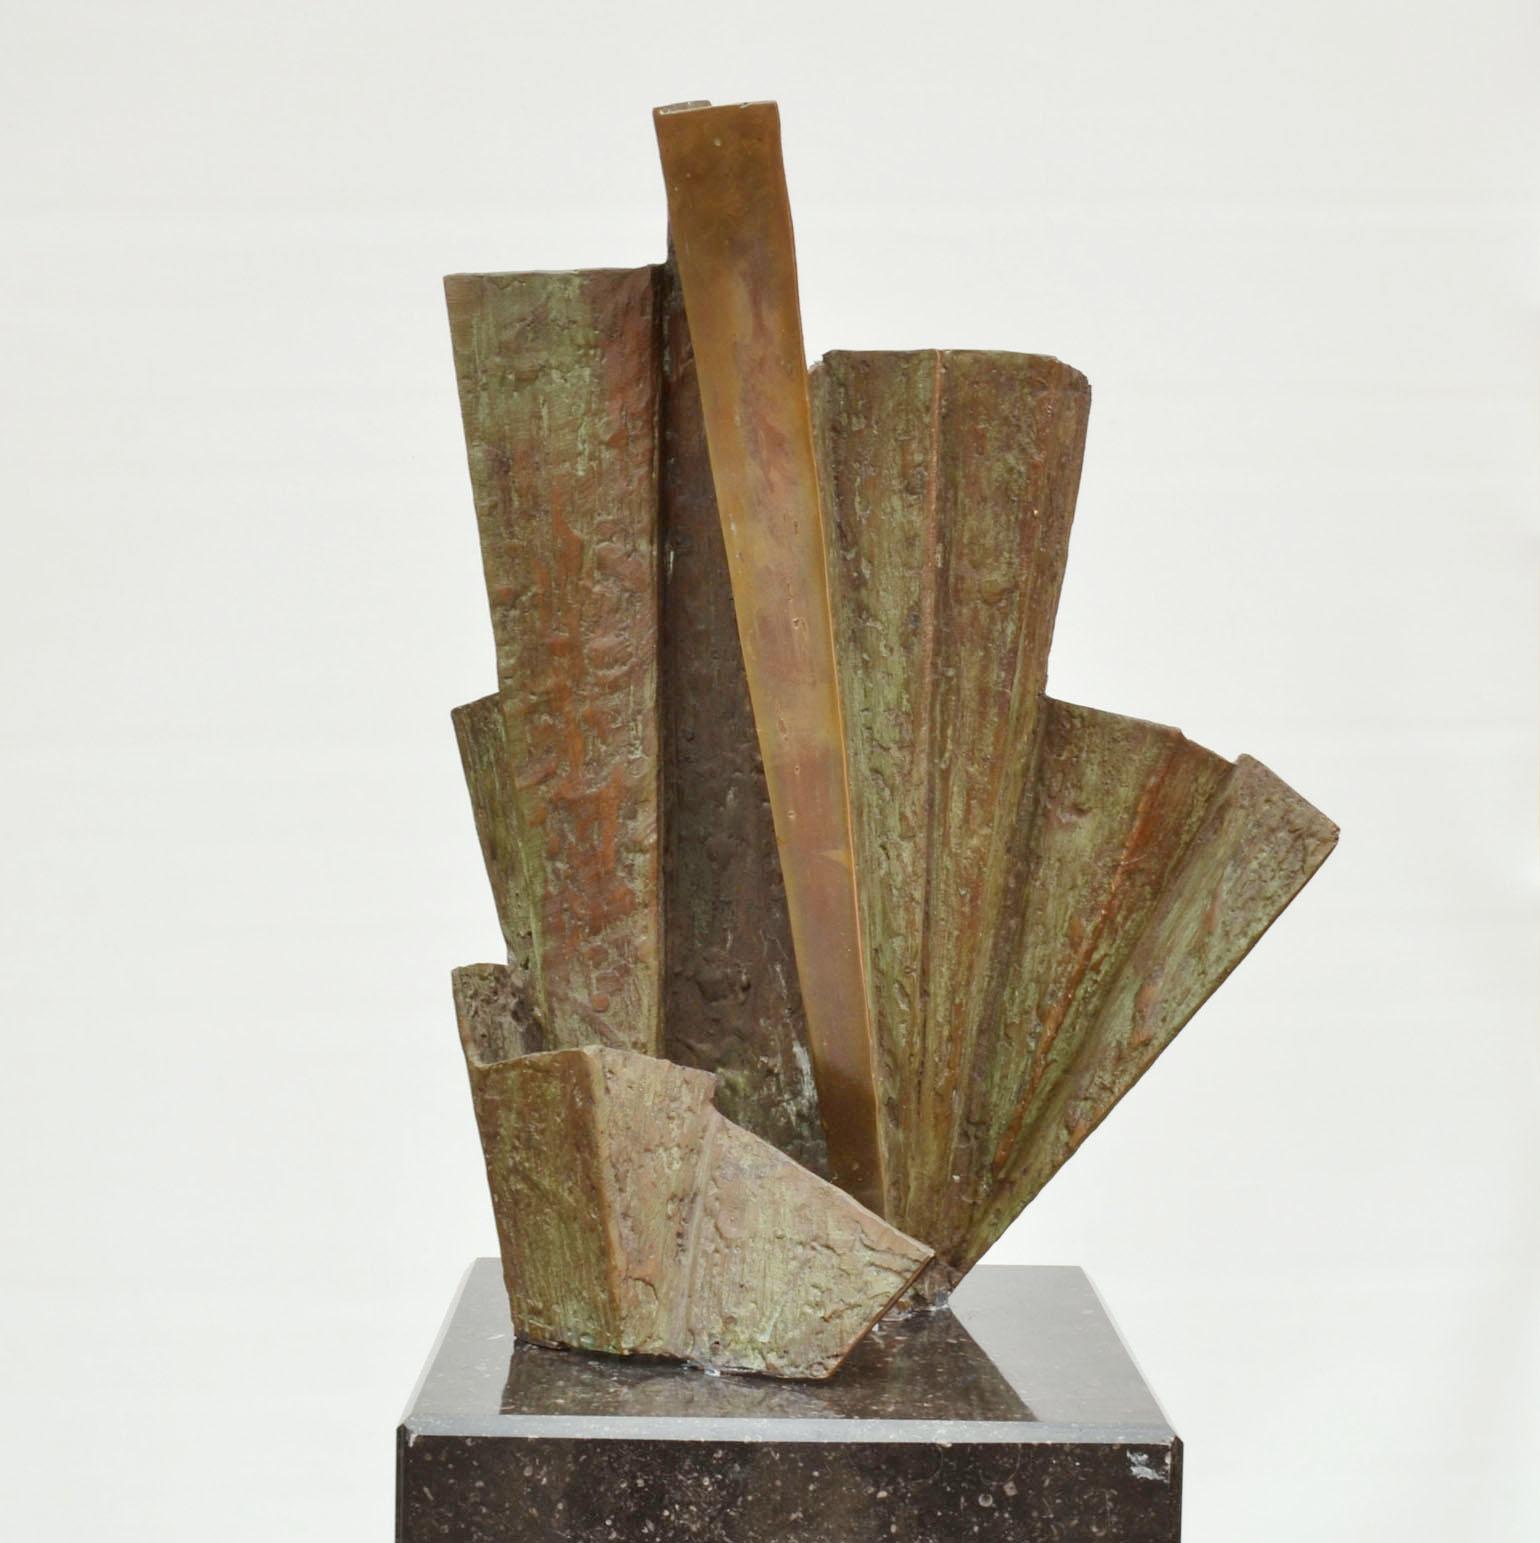 One of a two of abstract sculptures by Dutch artist Rien Goené (1929-2013) circa 1980, signed. The asymmetrical concertina shaped bronze sculpture is colored with a light green patina. Where areas are rubbed back they reveal the warm bronze